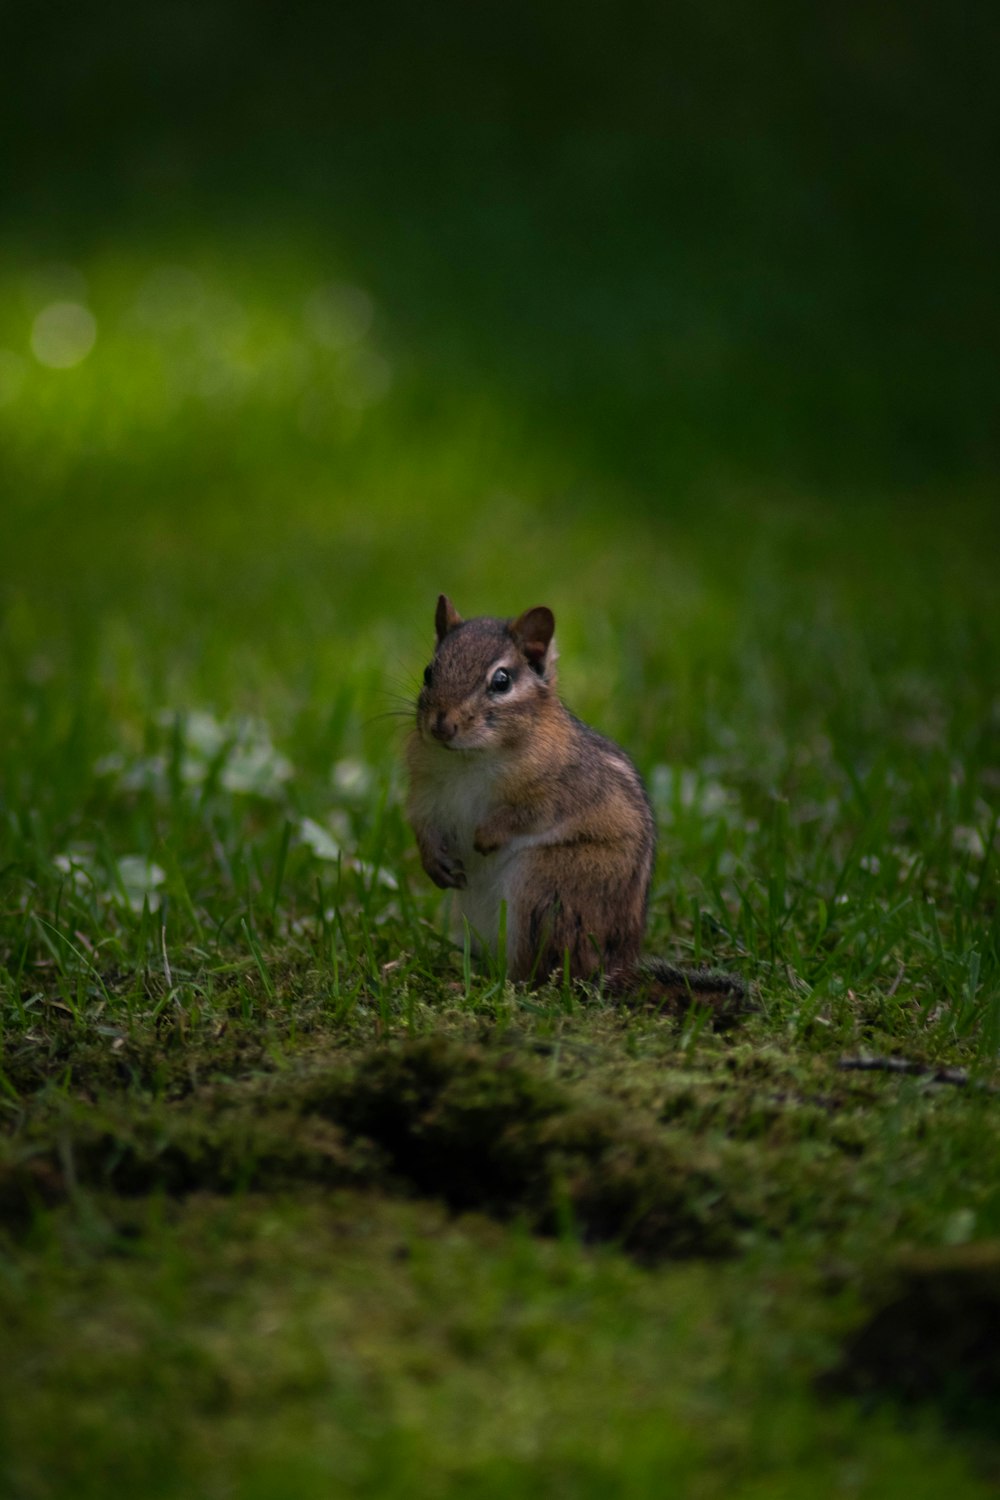 a small squirrel sitting in the grass